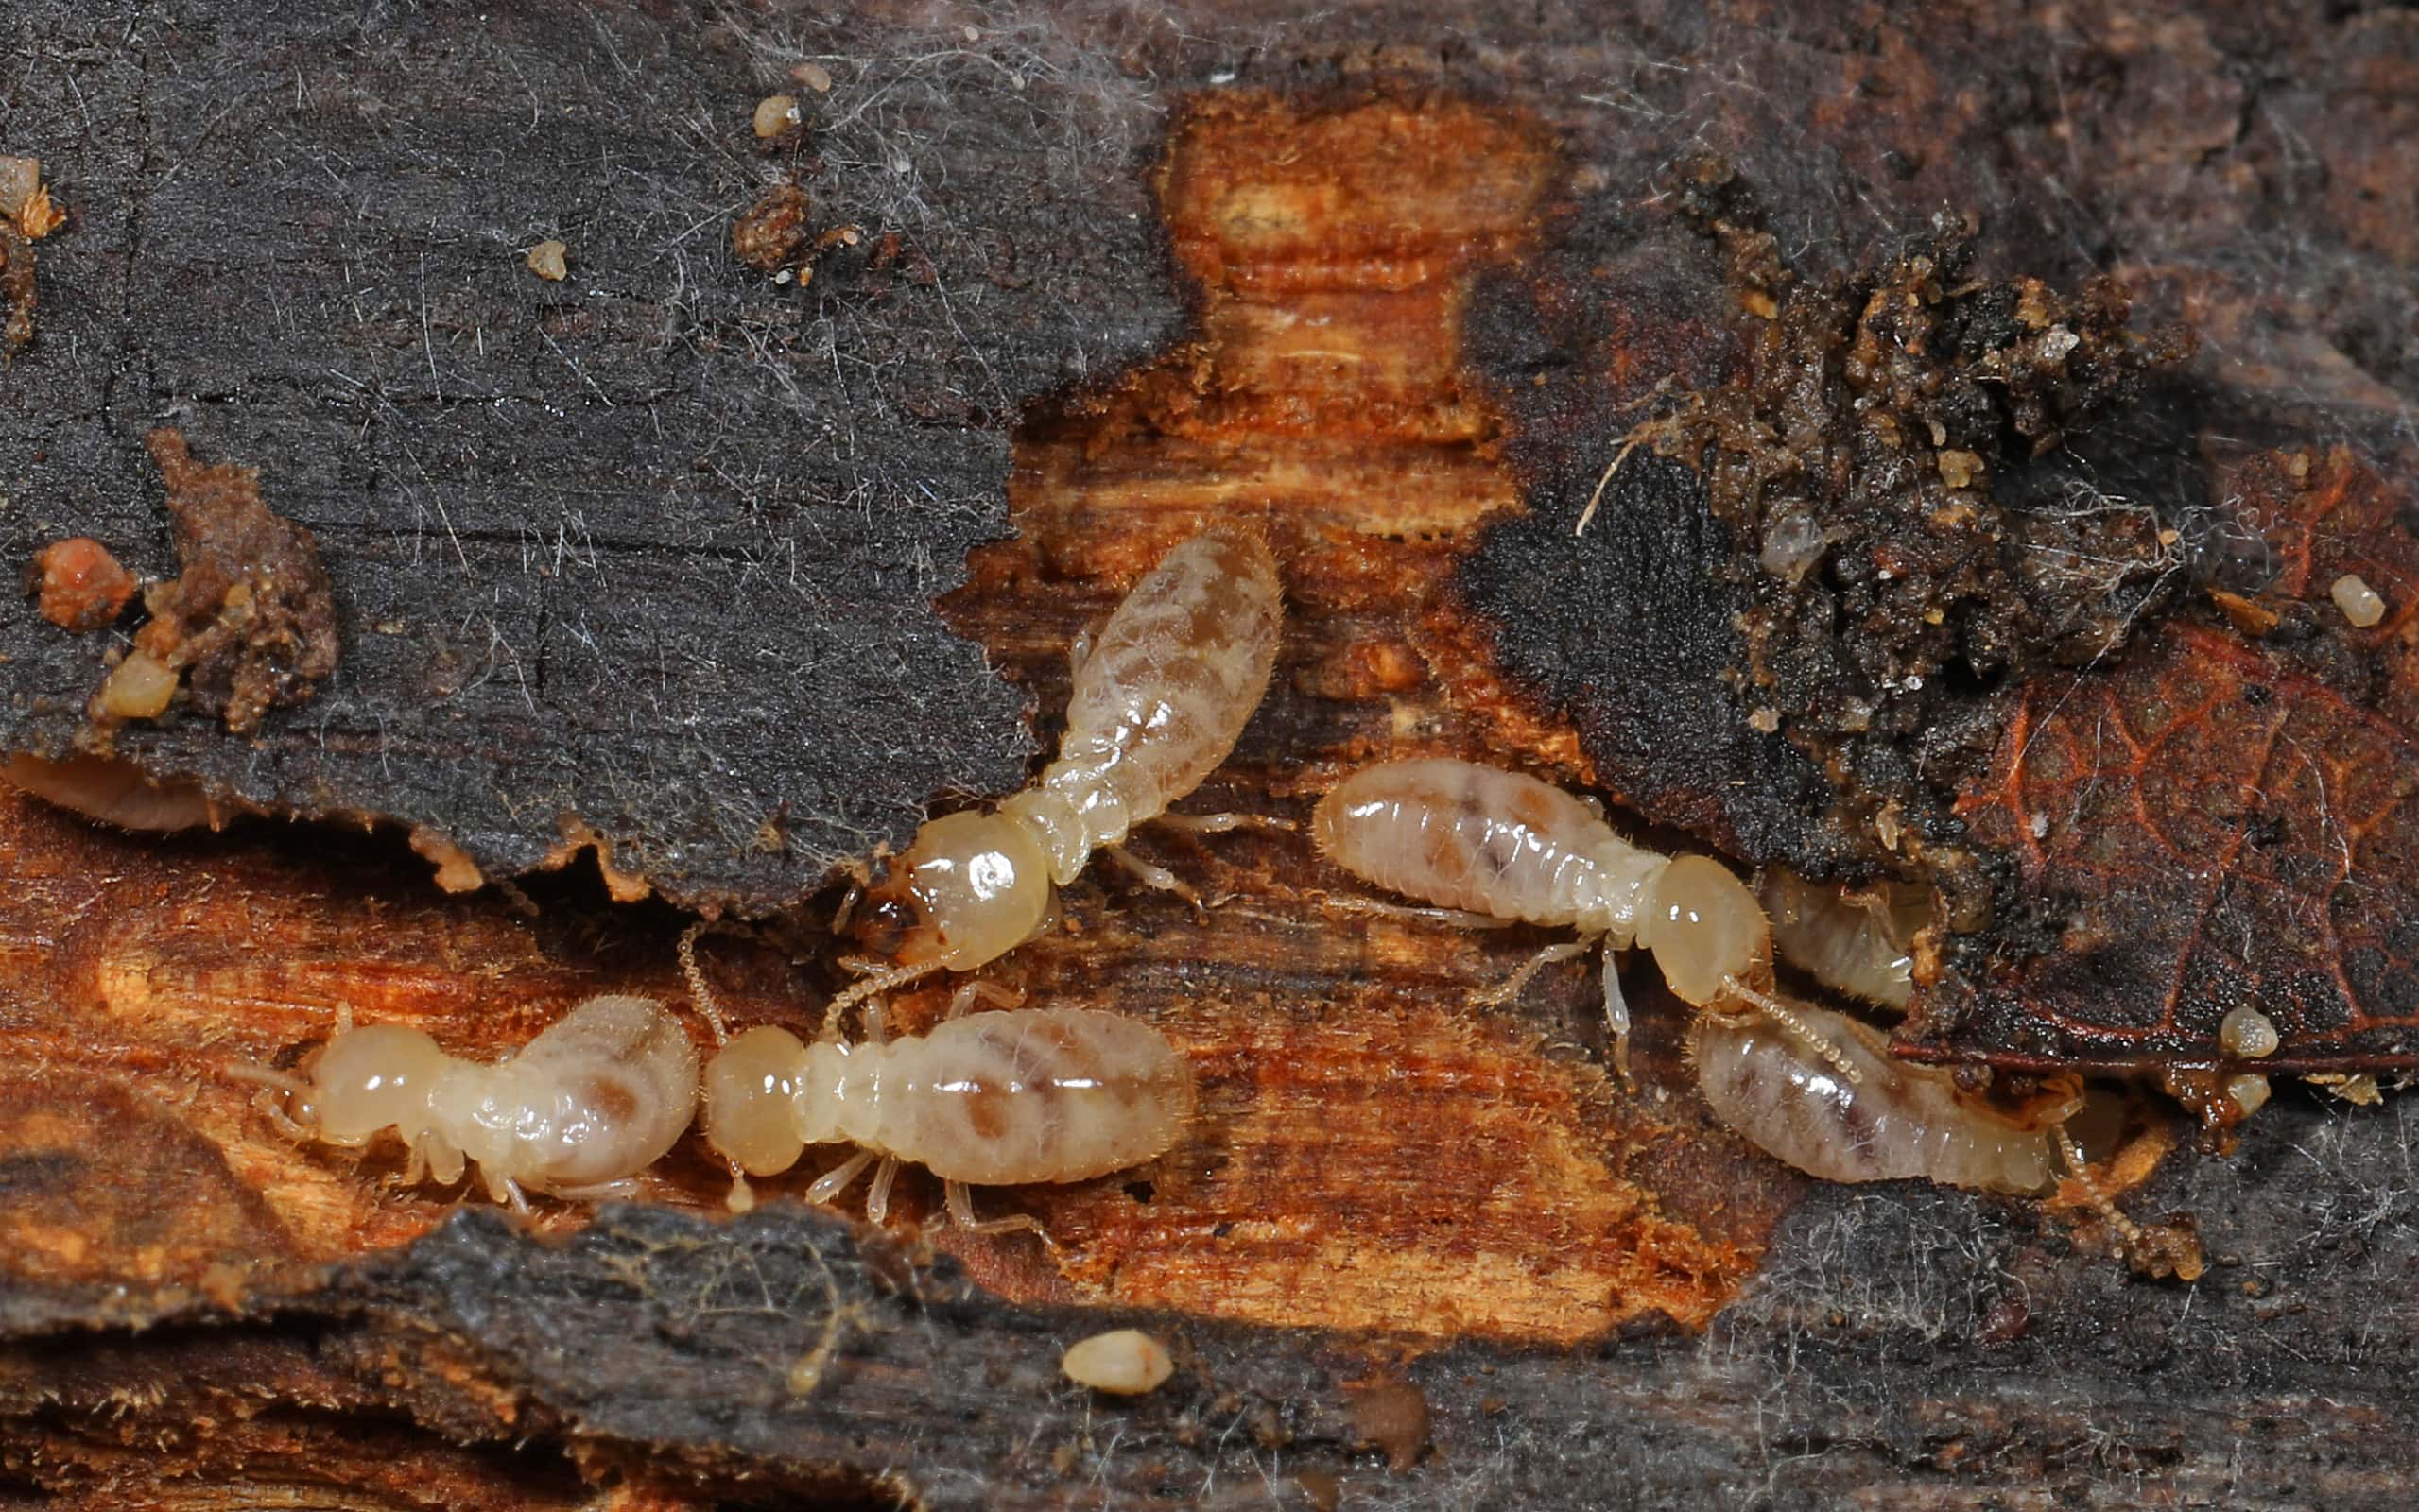 Eastern subterranean termites are found in the south and costal U.S.